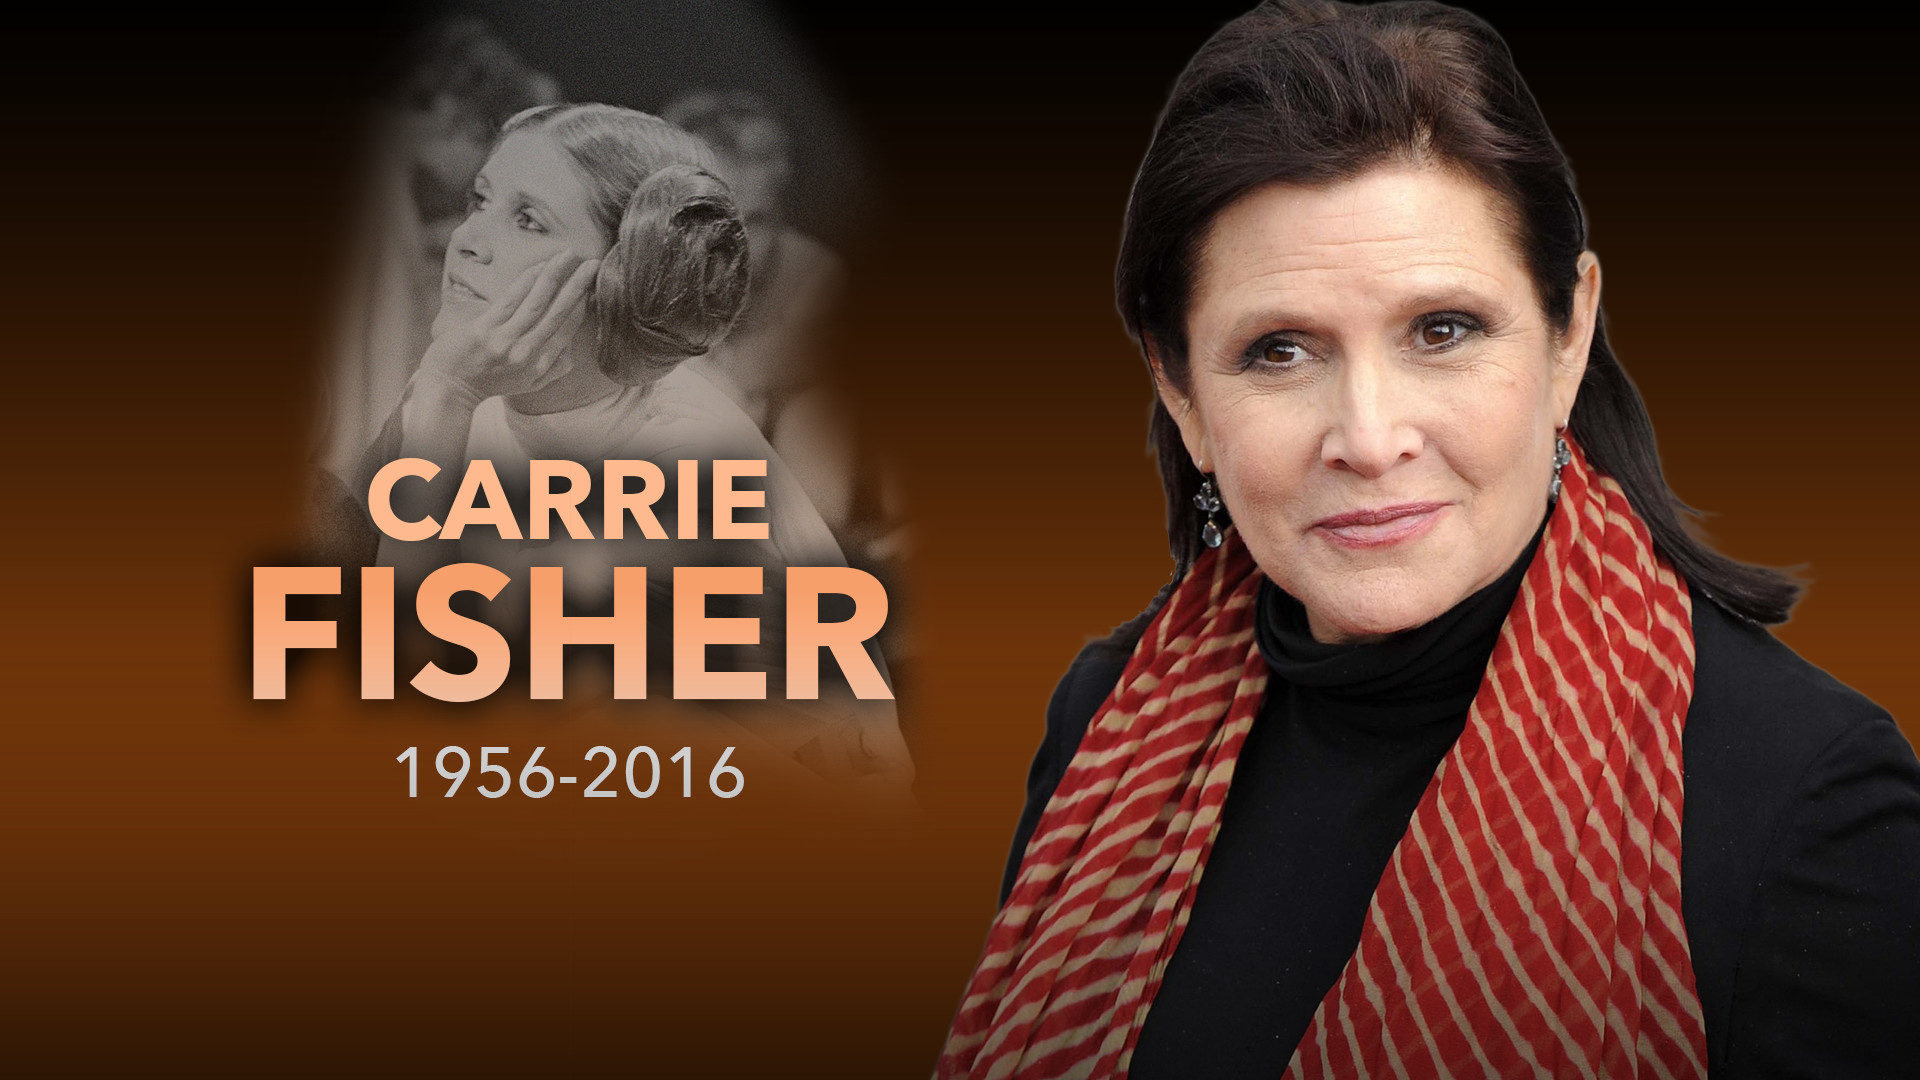 Daughter Actress And Author Carrie Fisher Dies At Age 60 1920x1080